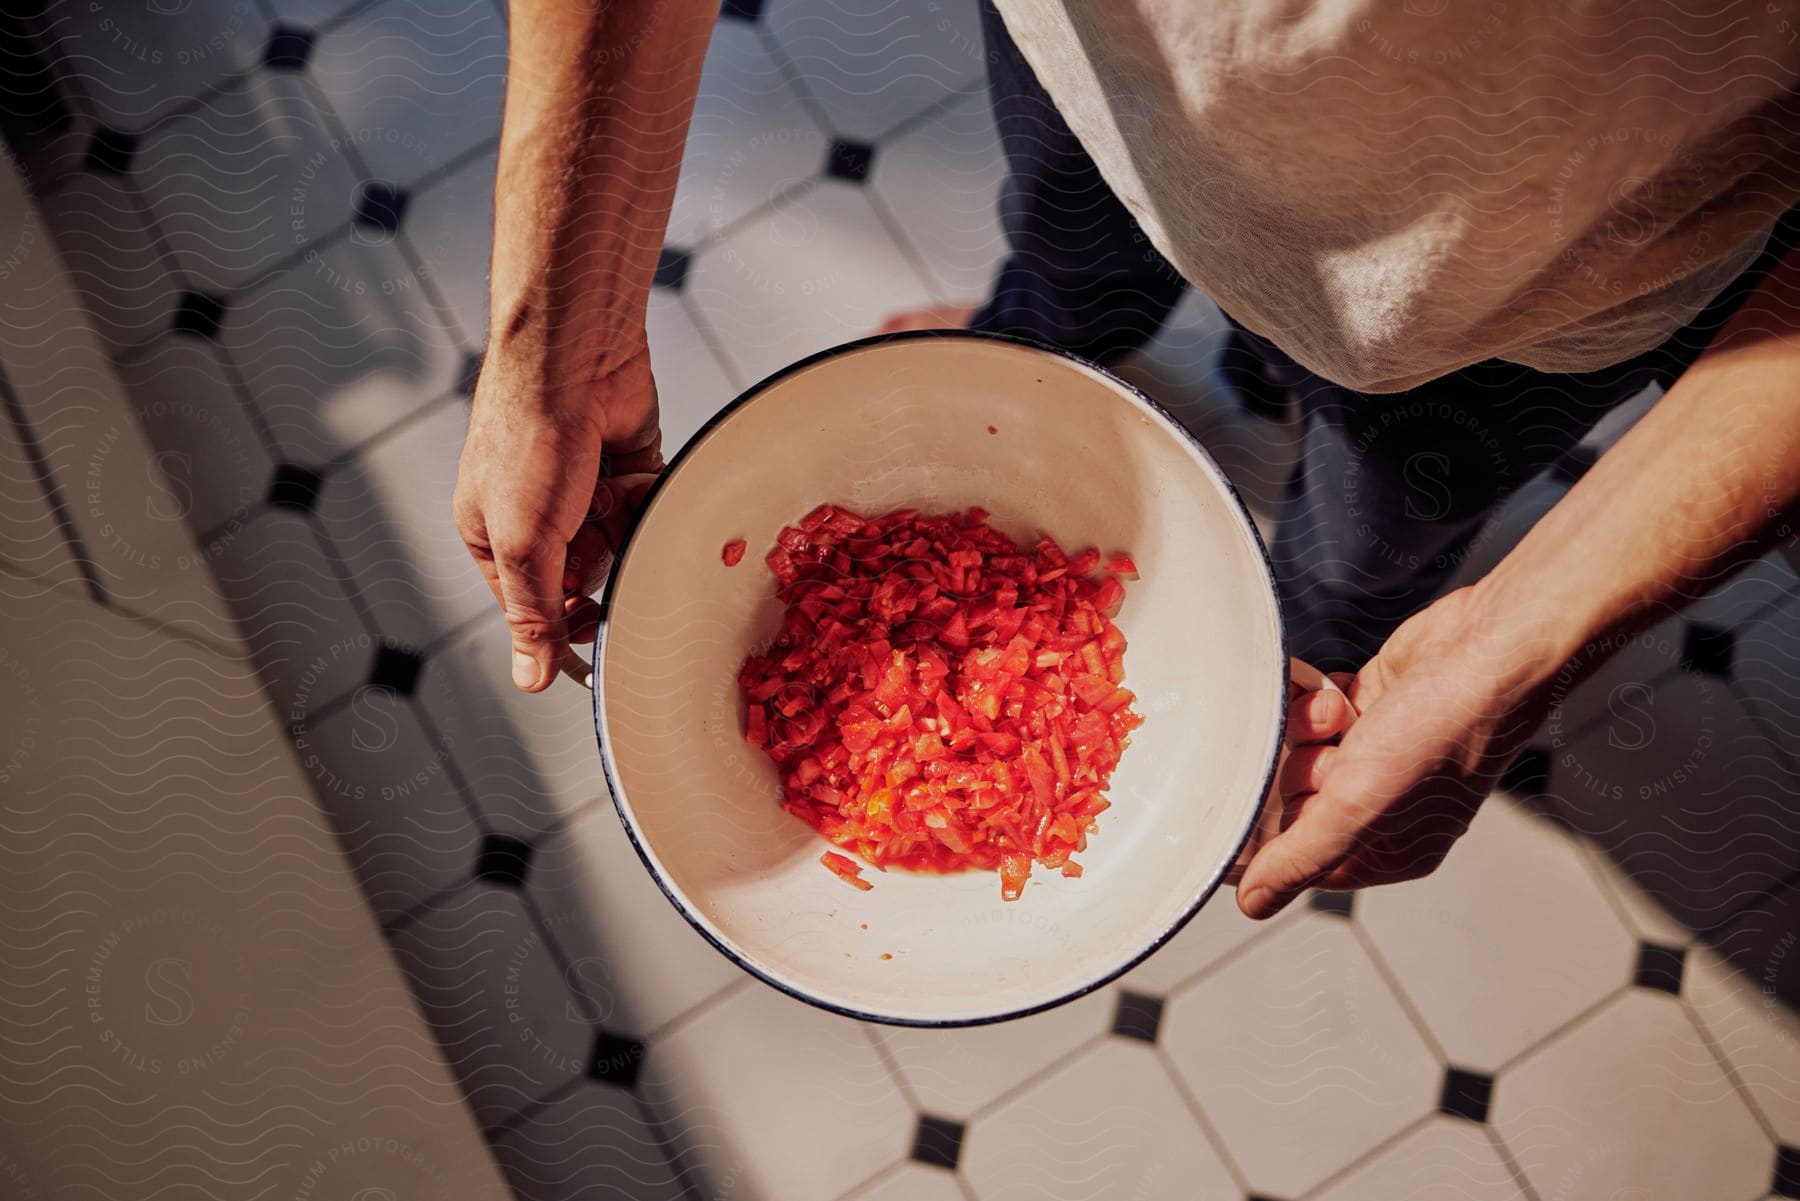 Man stands in kitchen holding bowl of chopped tomatoes.